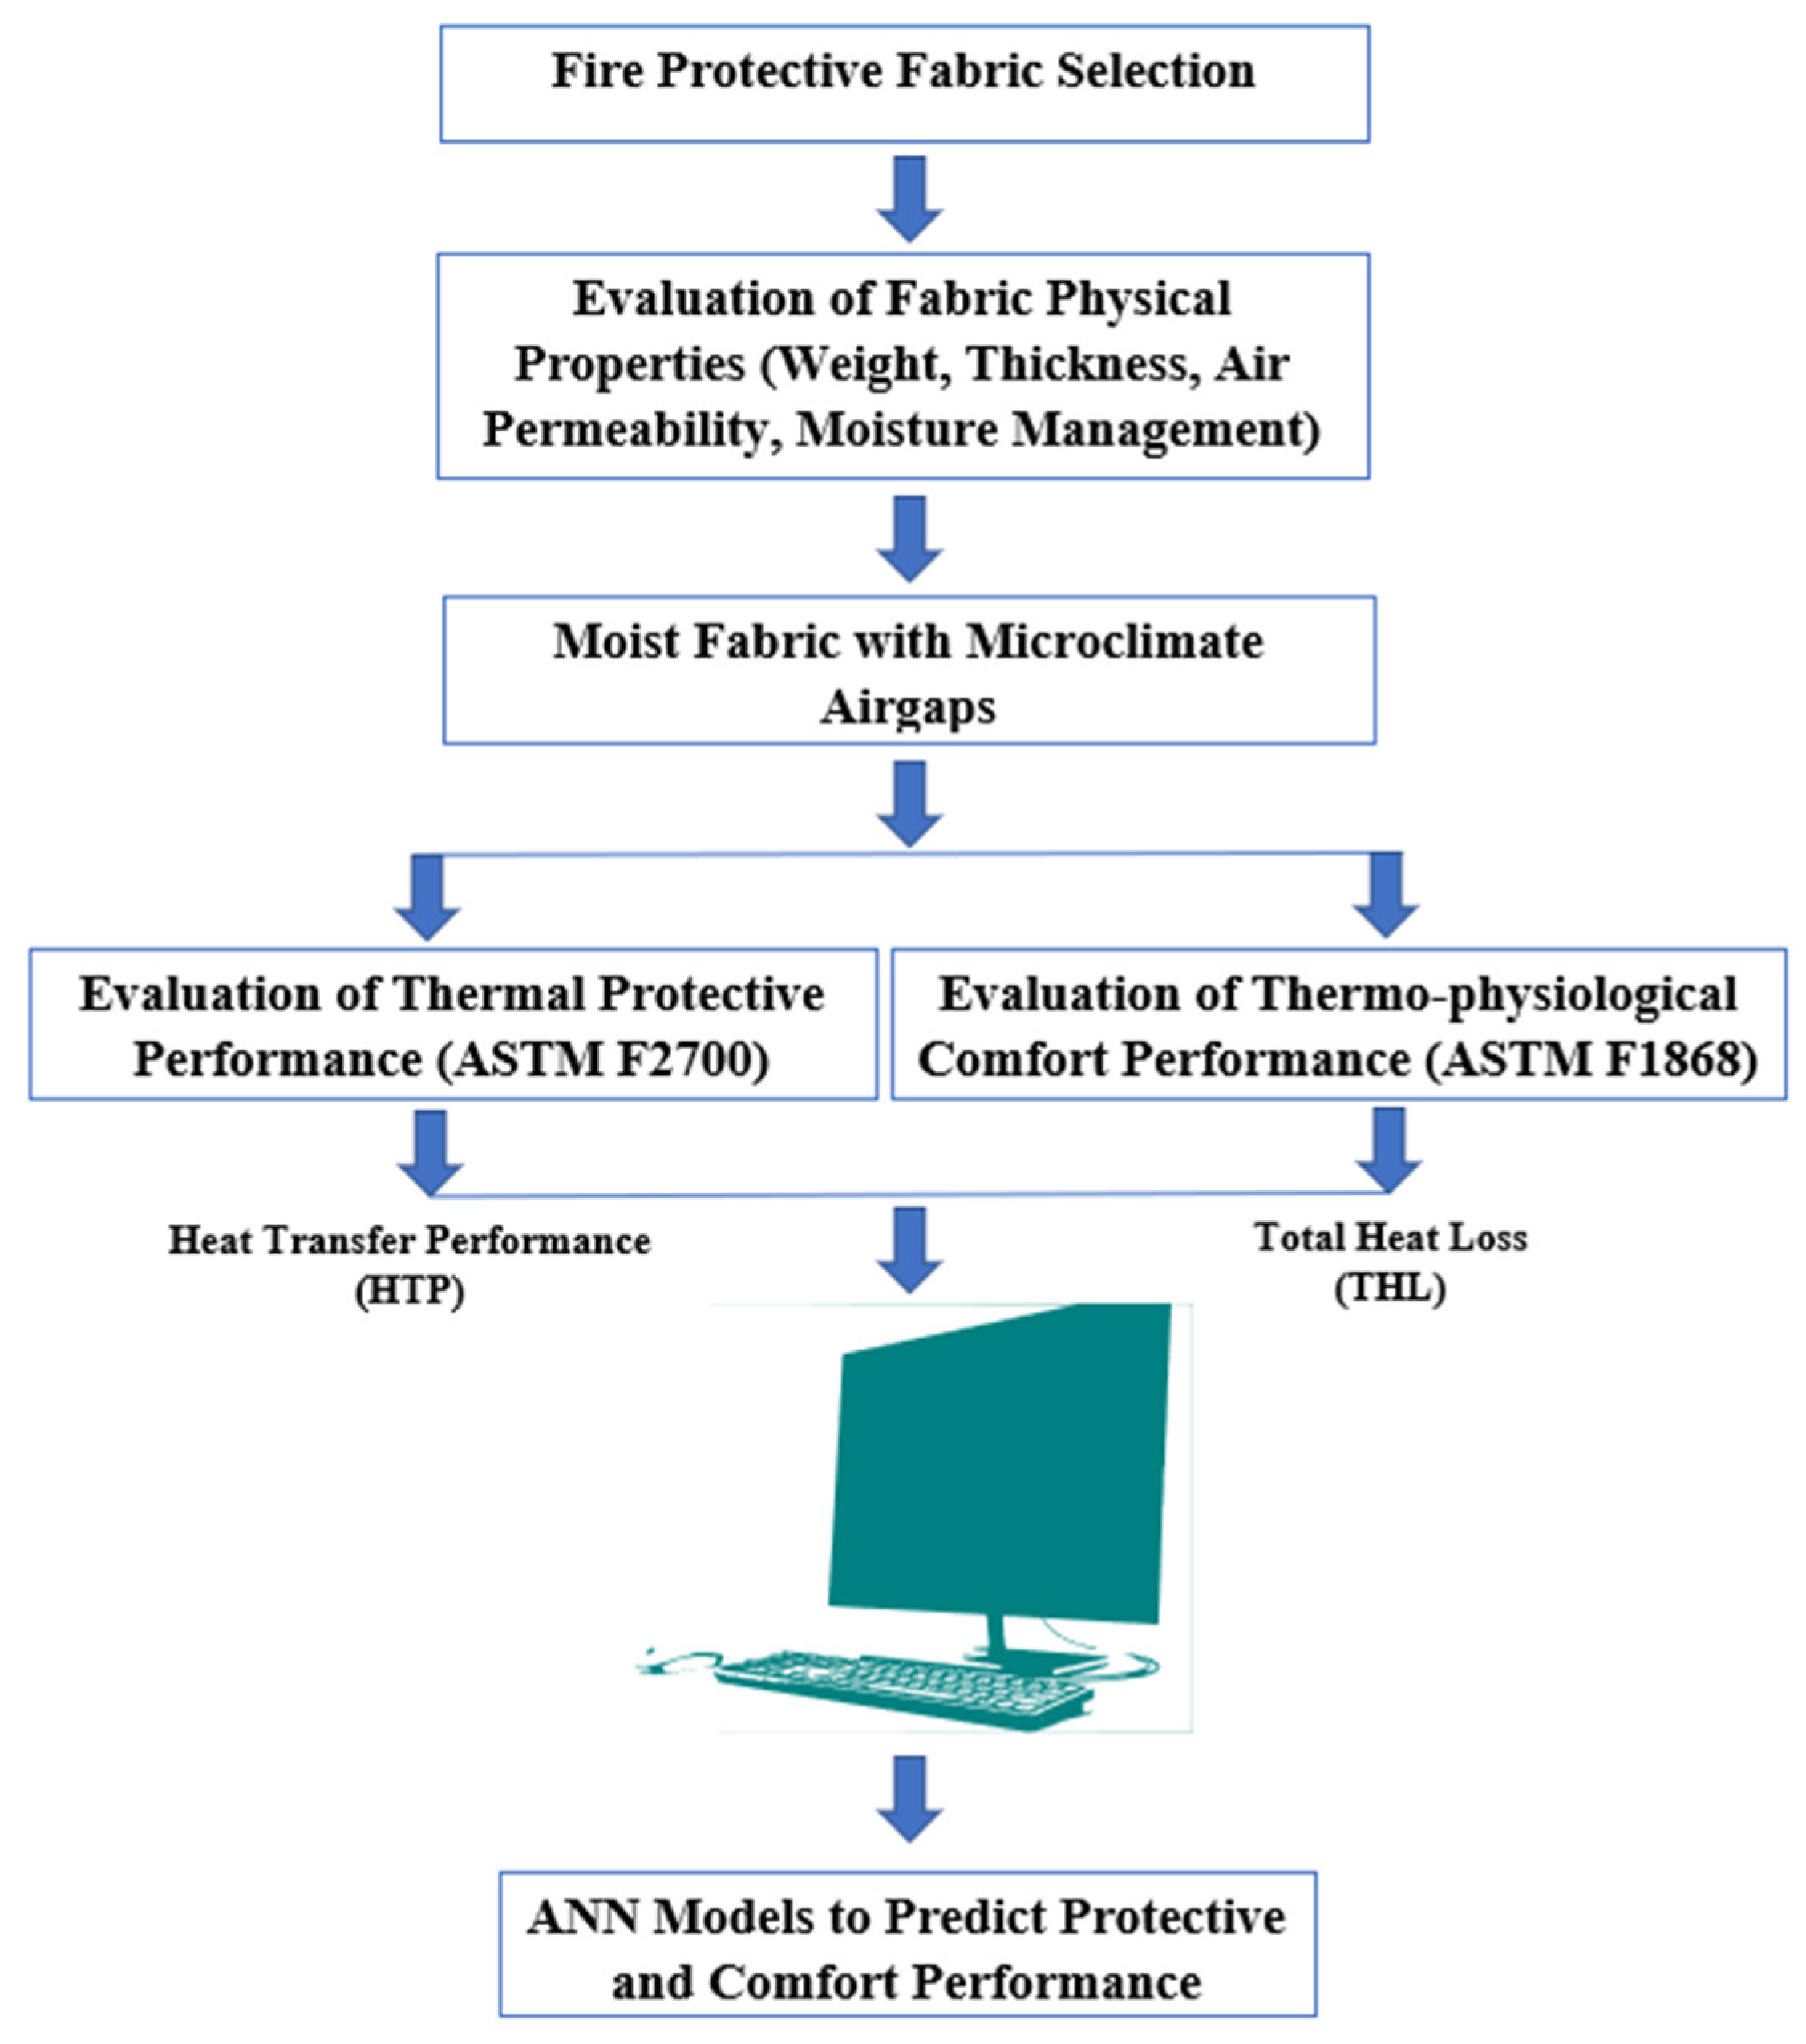 IJERPH | Free Full-Text | Using Artificial Neural Network Modeling to  Analyze the Thermal Protective and Thermo-Physiological Comfort Performance  of Textile Fabrics Used in Oilfield Workers' Clothing